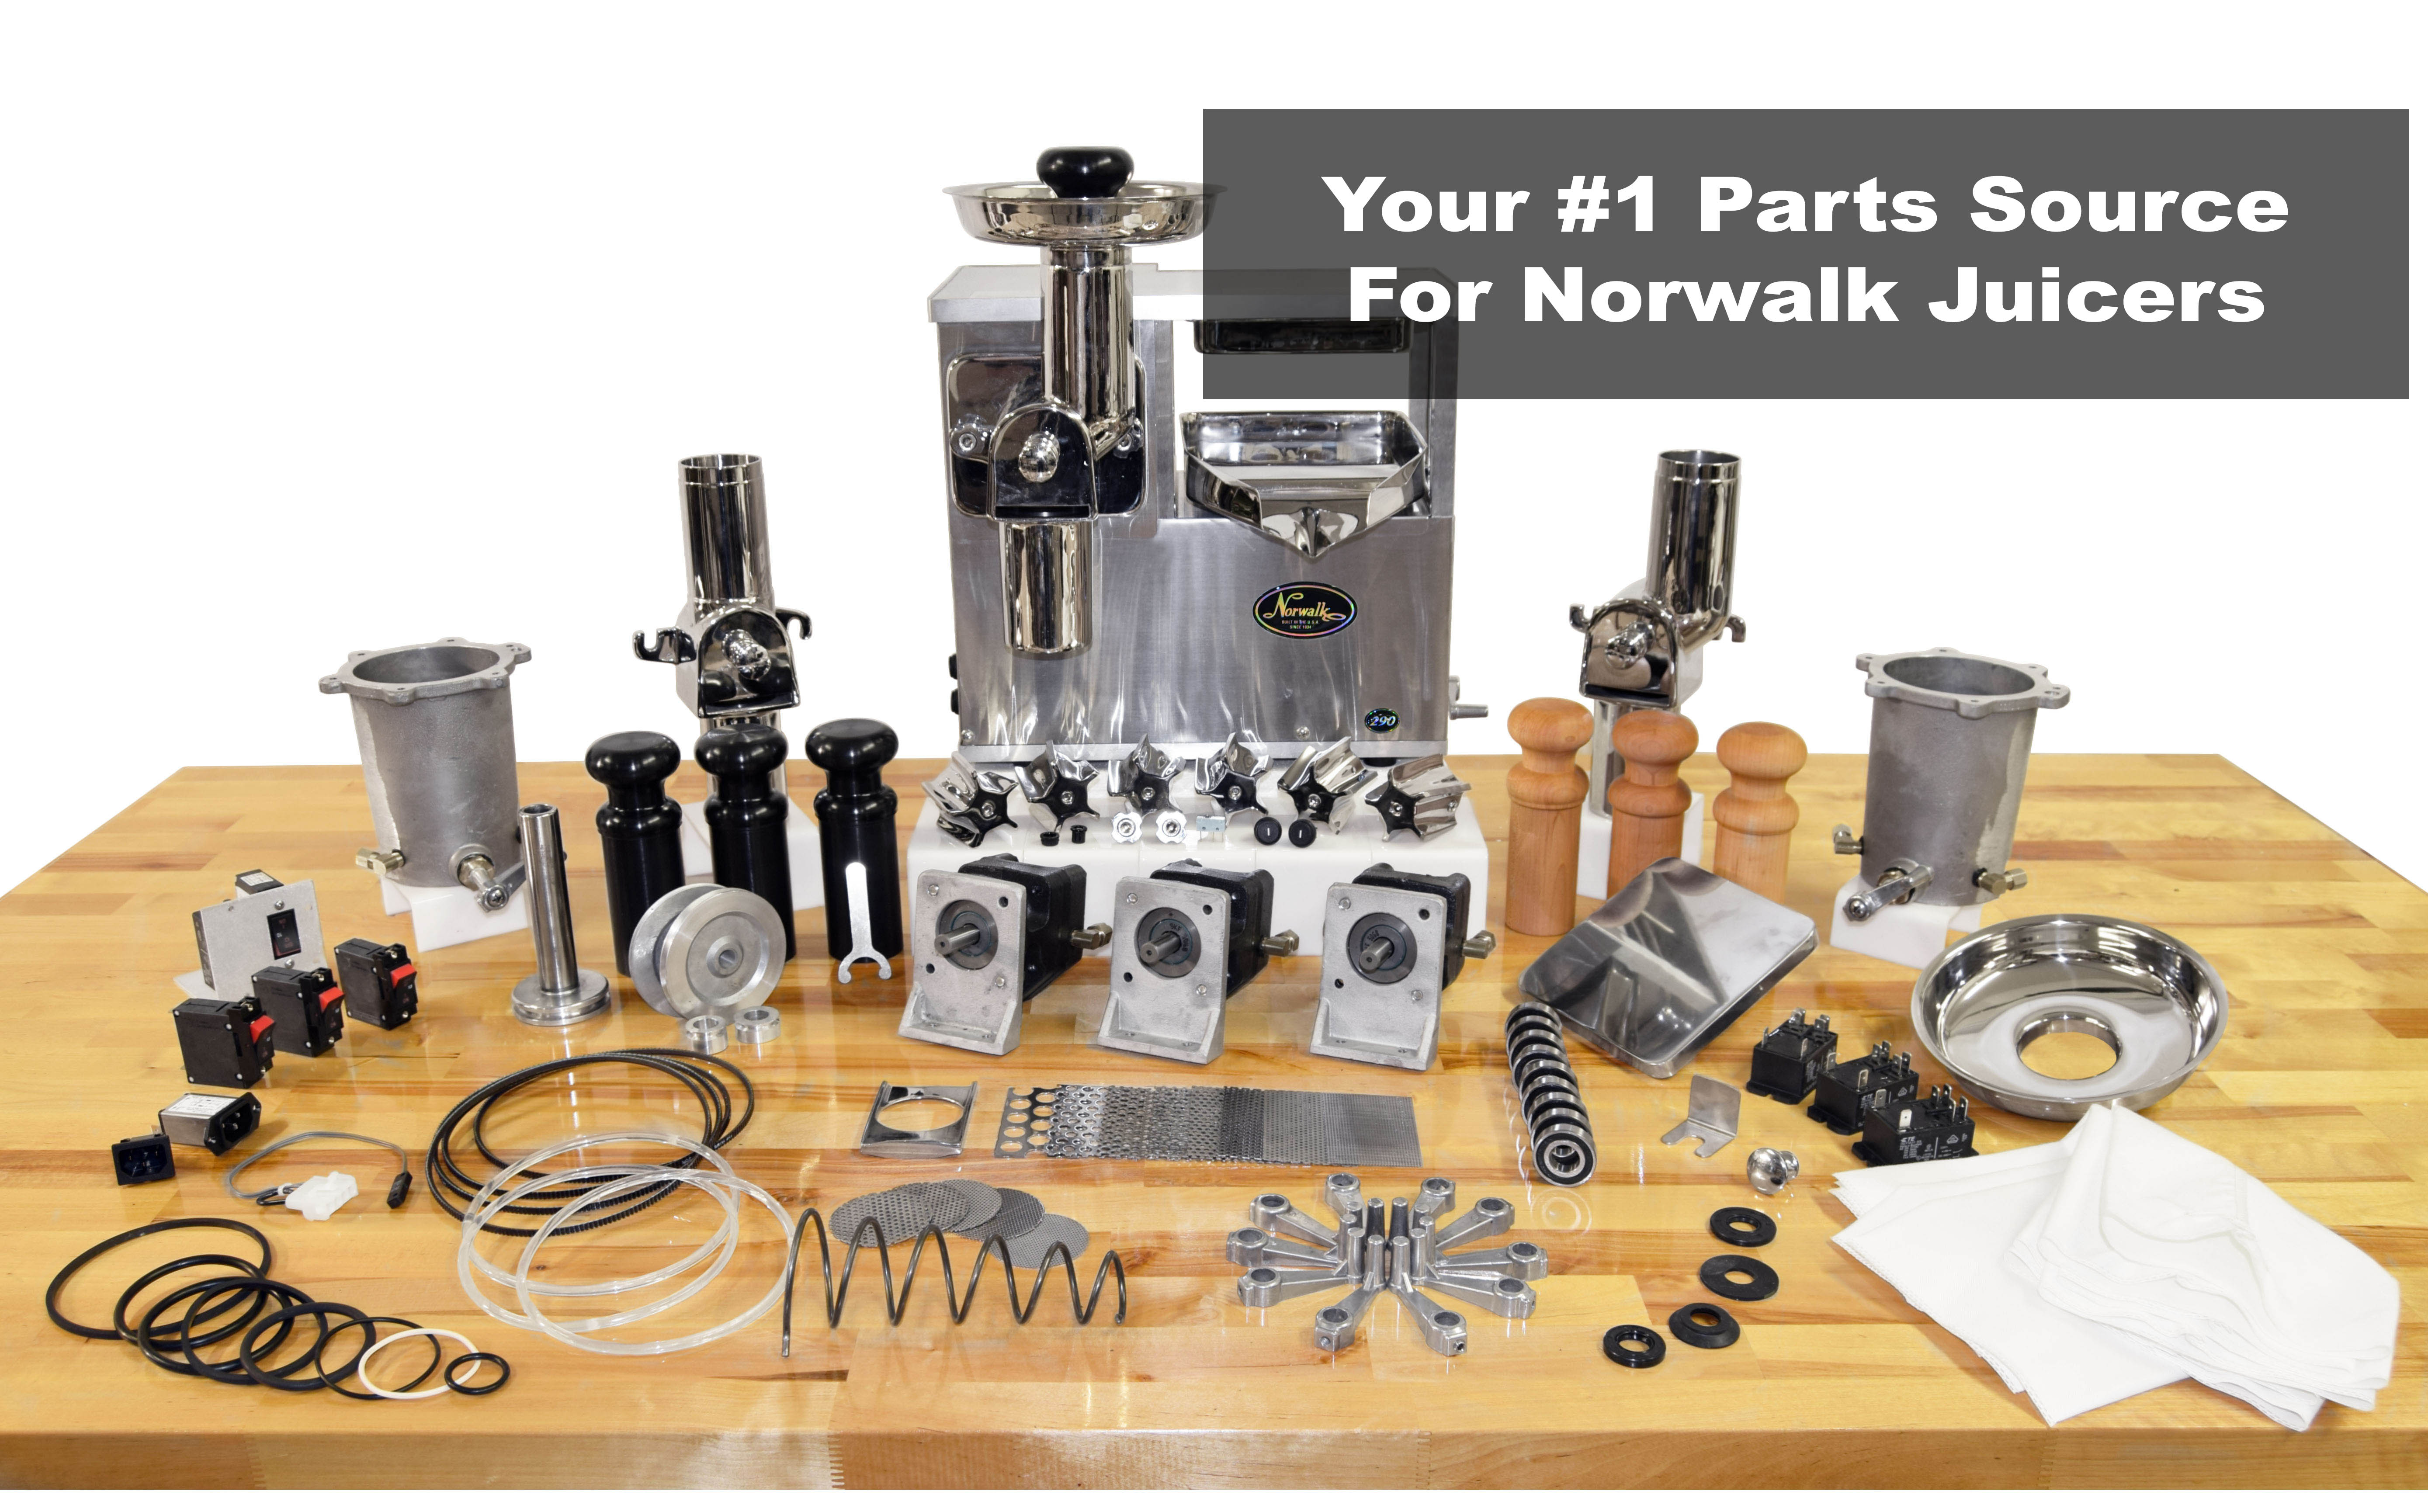 For Reliable Parts And Service of Your Norwalk Juicer